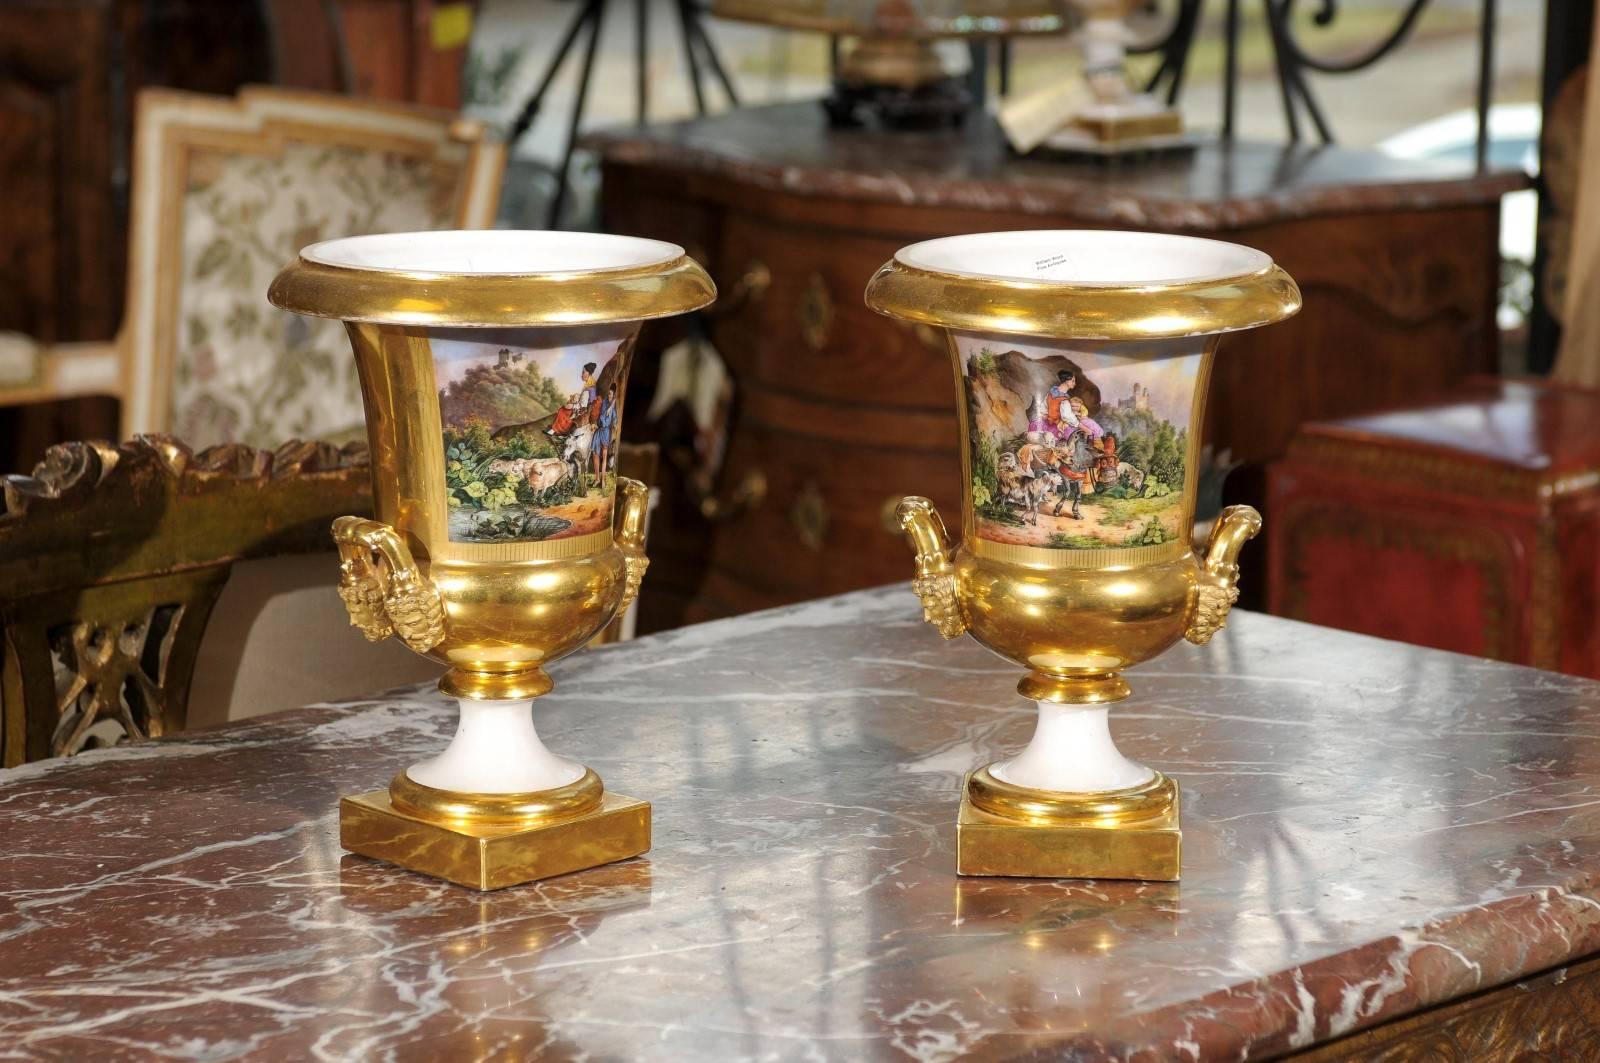 Pair of 19th century French Paris porcelain urns with painted scenes and handles.